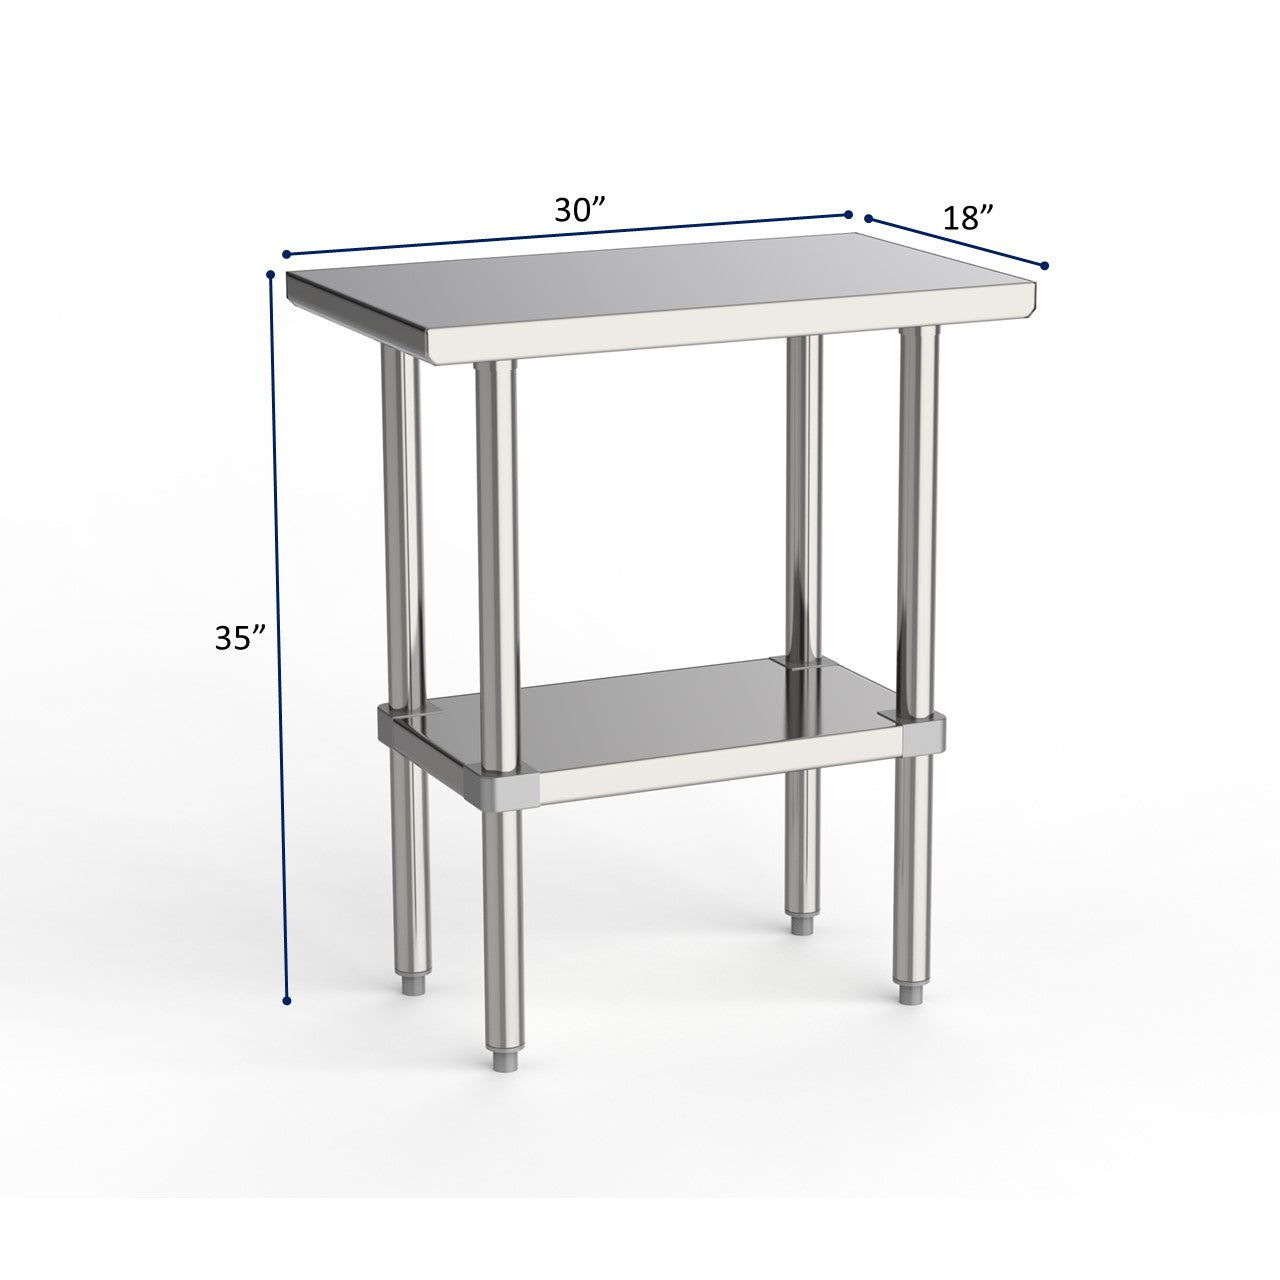 GSW Commercial Grade Flat Top Work Table with All Stainless Steel Top, Undershelf & Legs, Adjustable Bullet Feet, NSF & ETL Approved to Meet Sanitation Food Service Standard 37 (30"D x 18"L x 35"H)